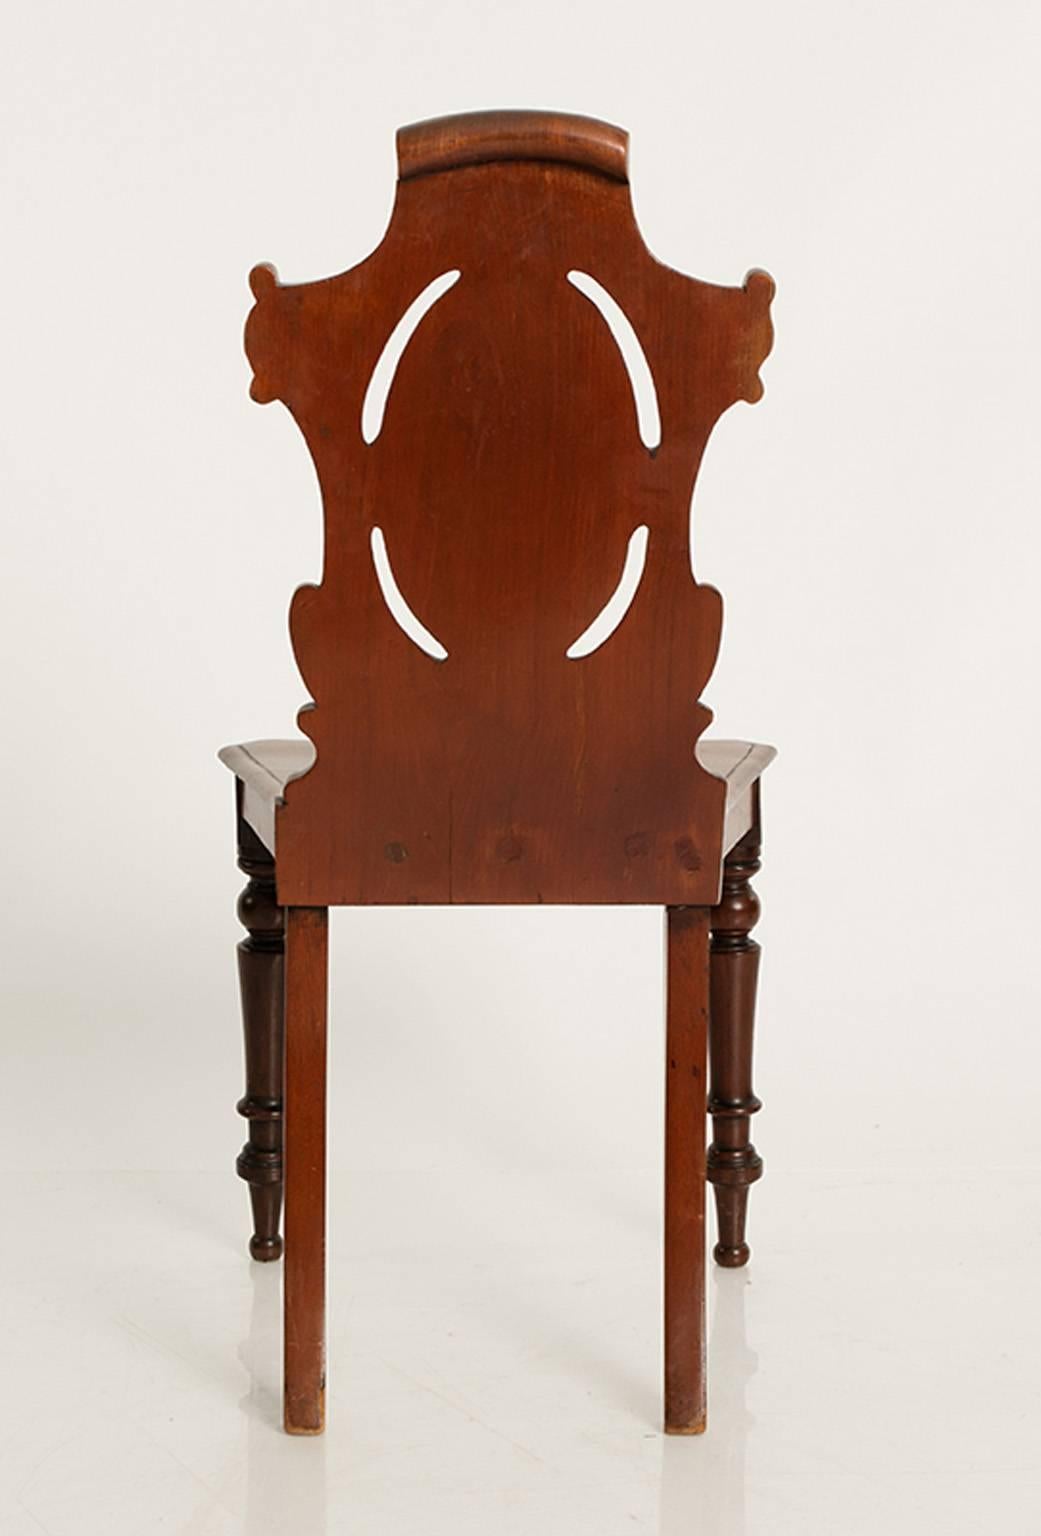 Pair of 19th century hall chairs with carved backs, turned legs, and a plank seat. 